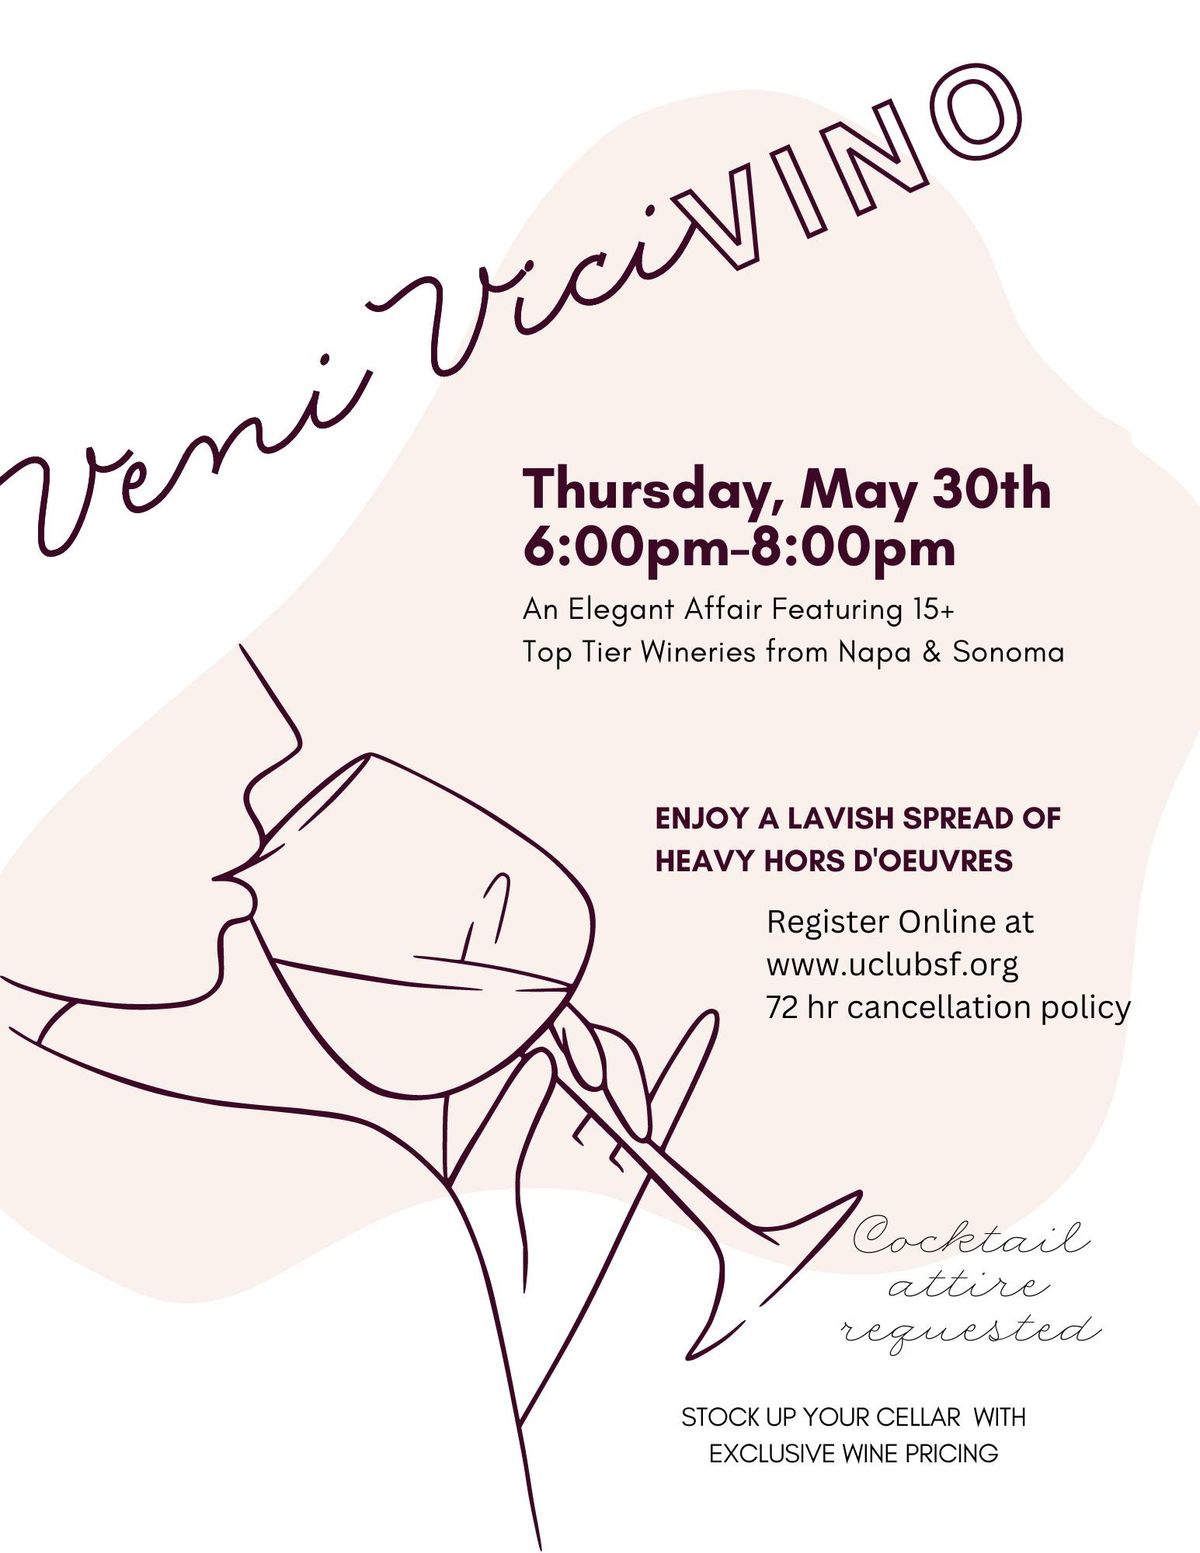 Veni Vici VINO! (for members and invited guests only)